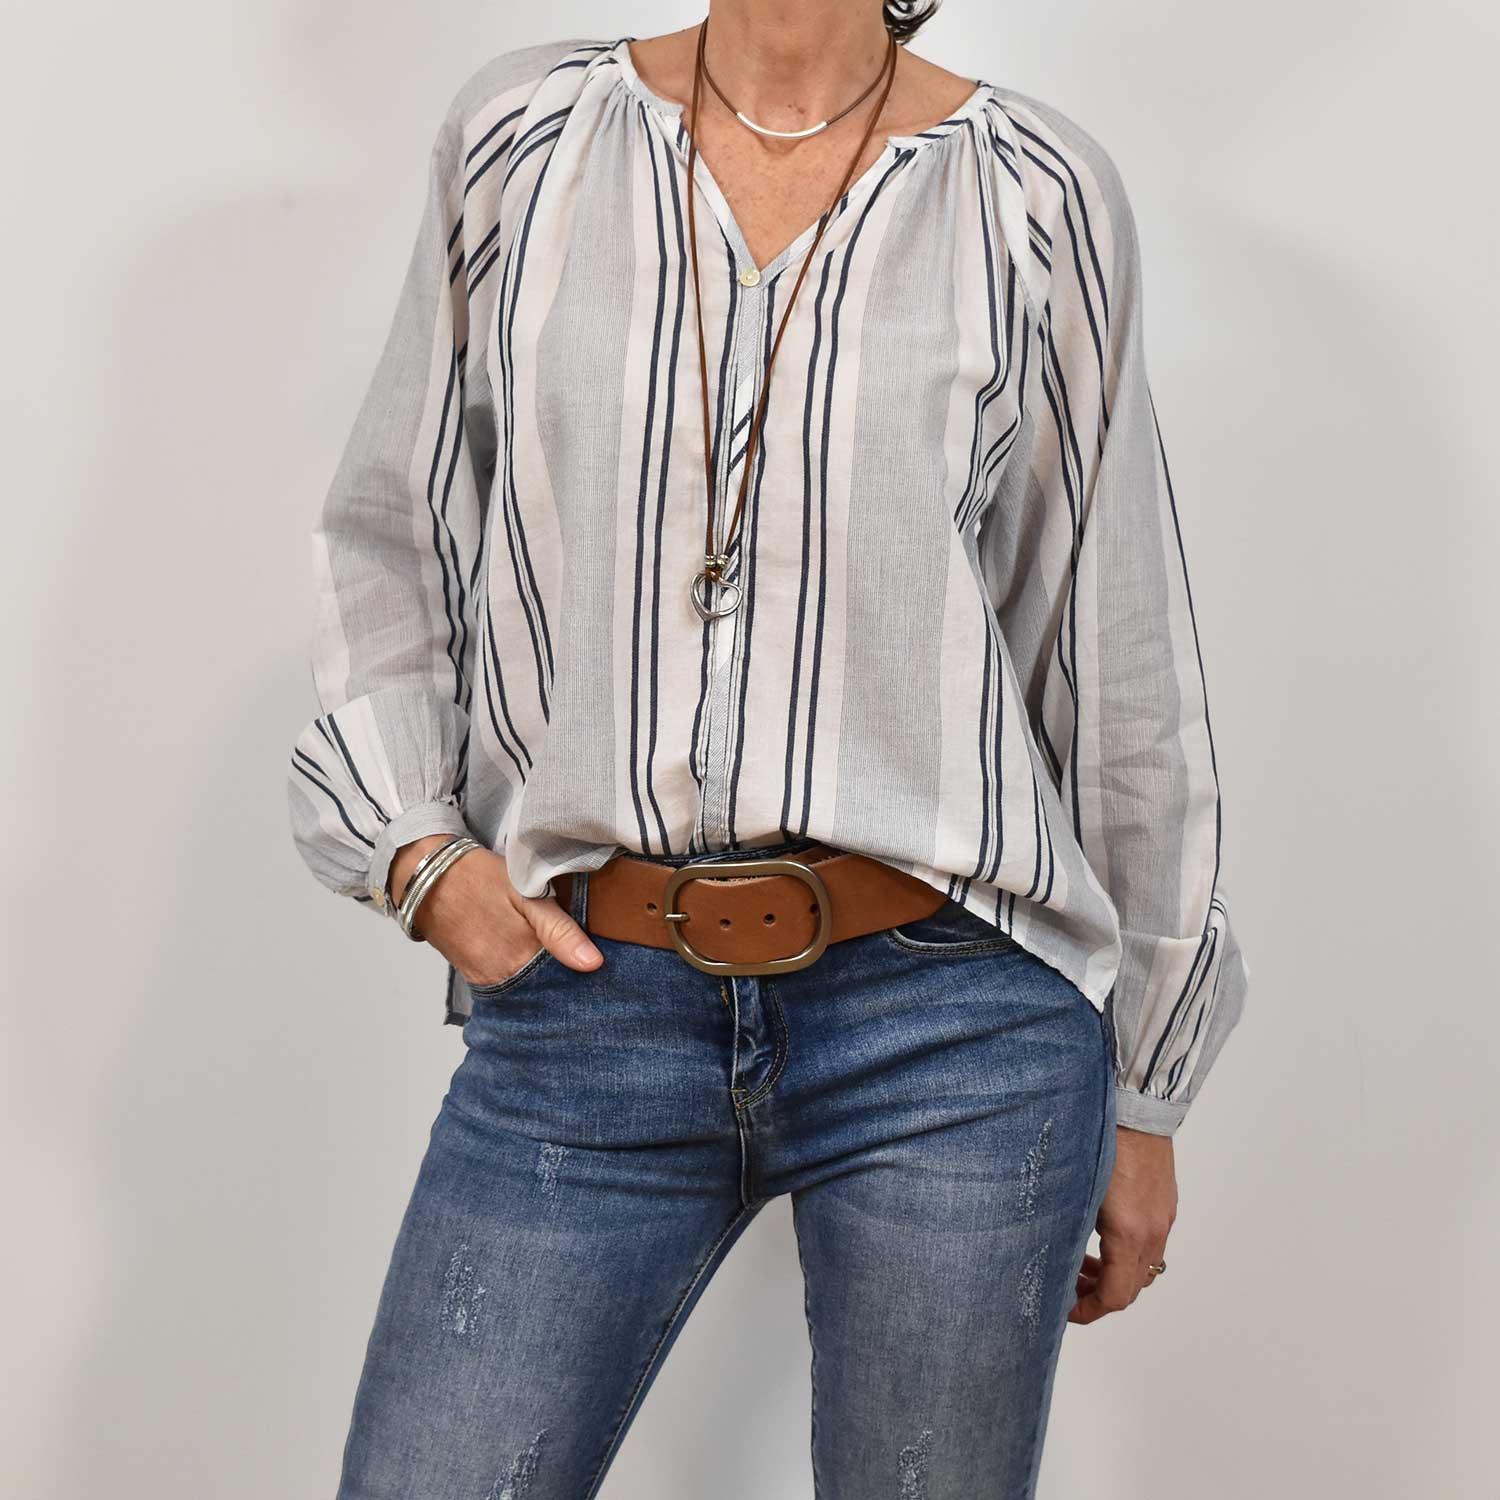 Stripped blouse